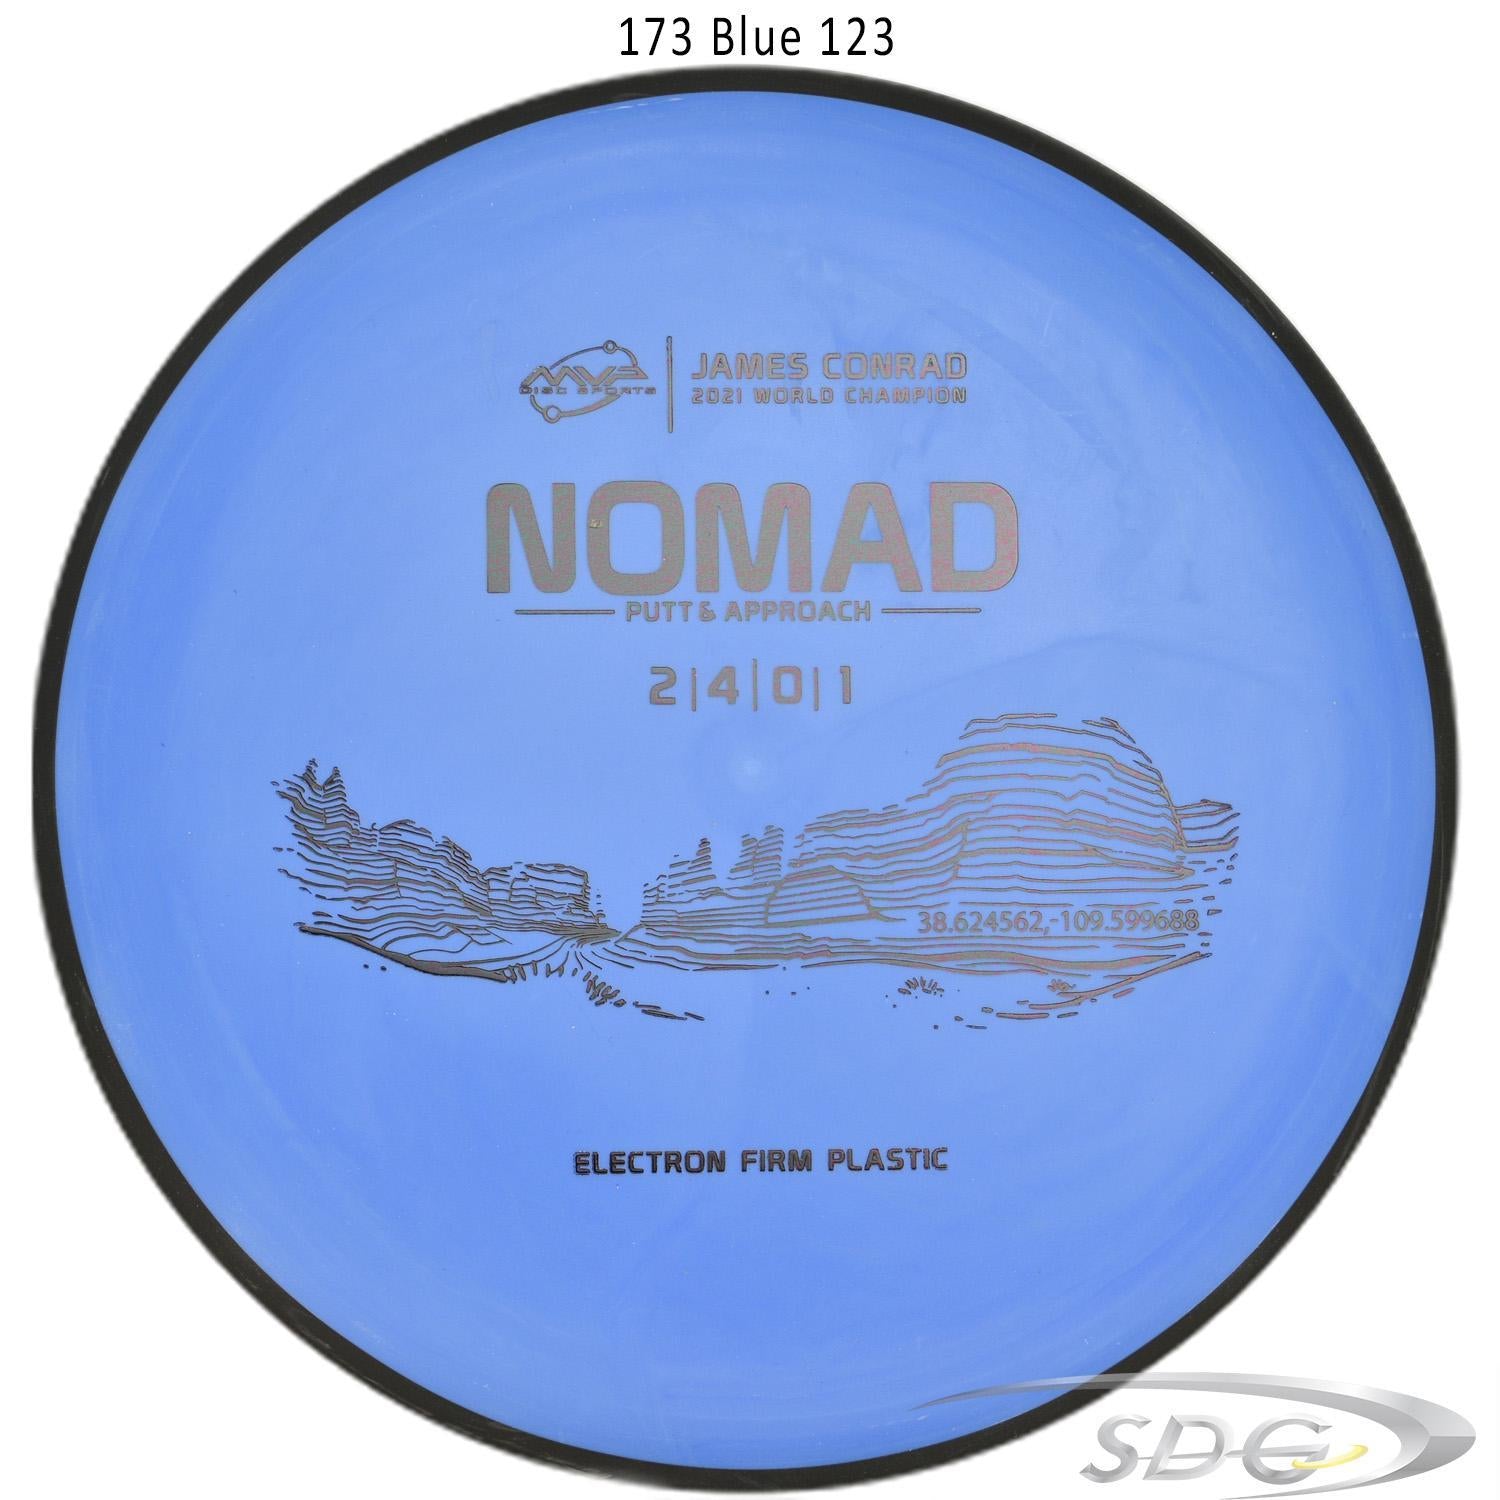 mvp-electron-nomad-firm-james-conrad-edition-disc-golf-putter 173 Blue 123 